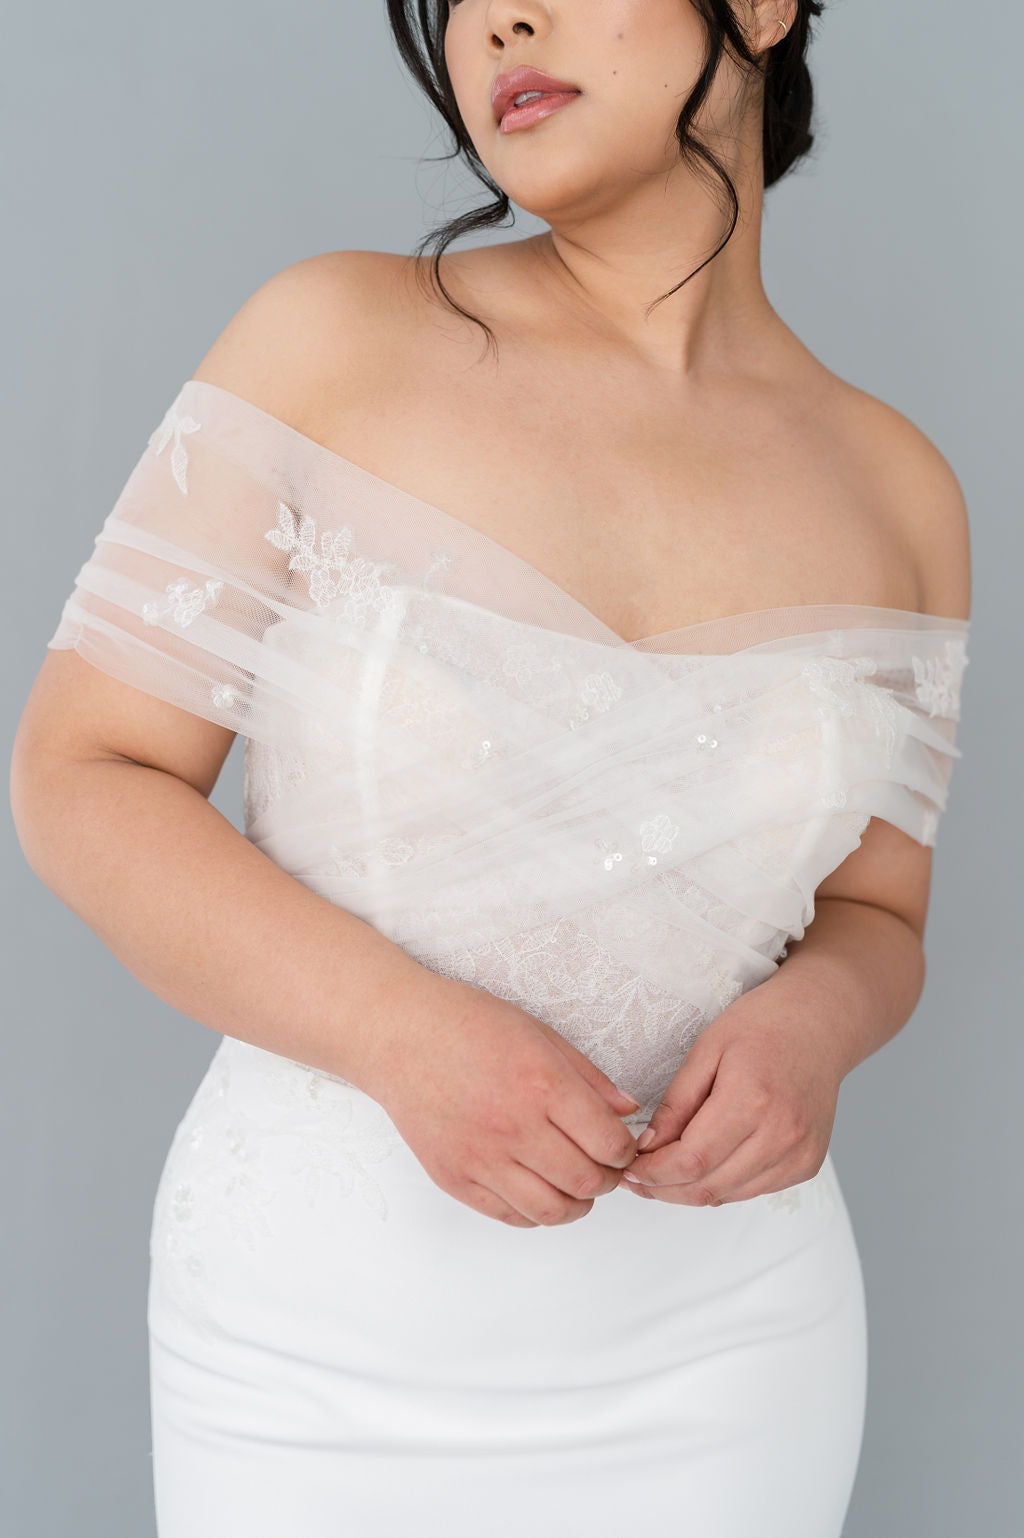 Romantic off the shoulder wedding dress by Catherine Langlois. Fit and flare silhouette accentuates the body in a modern intrepretation of delicate design. Inclusive size wedding dresses made in Canada.